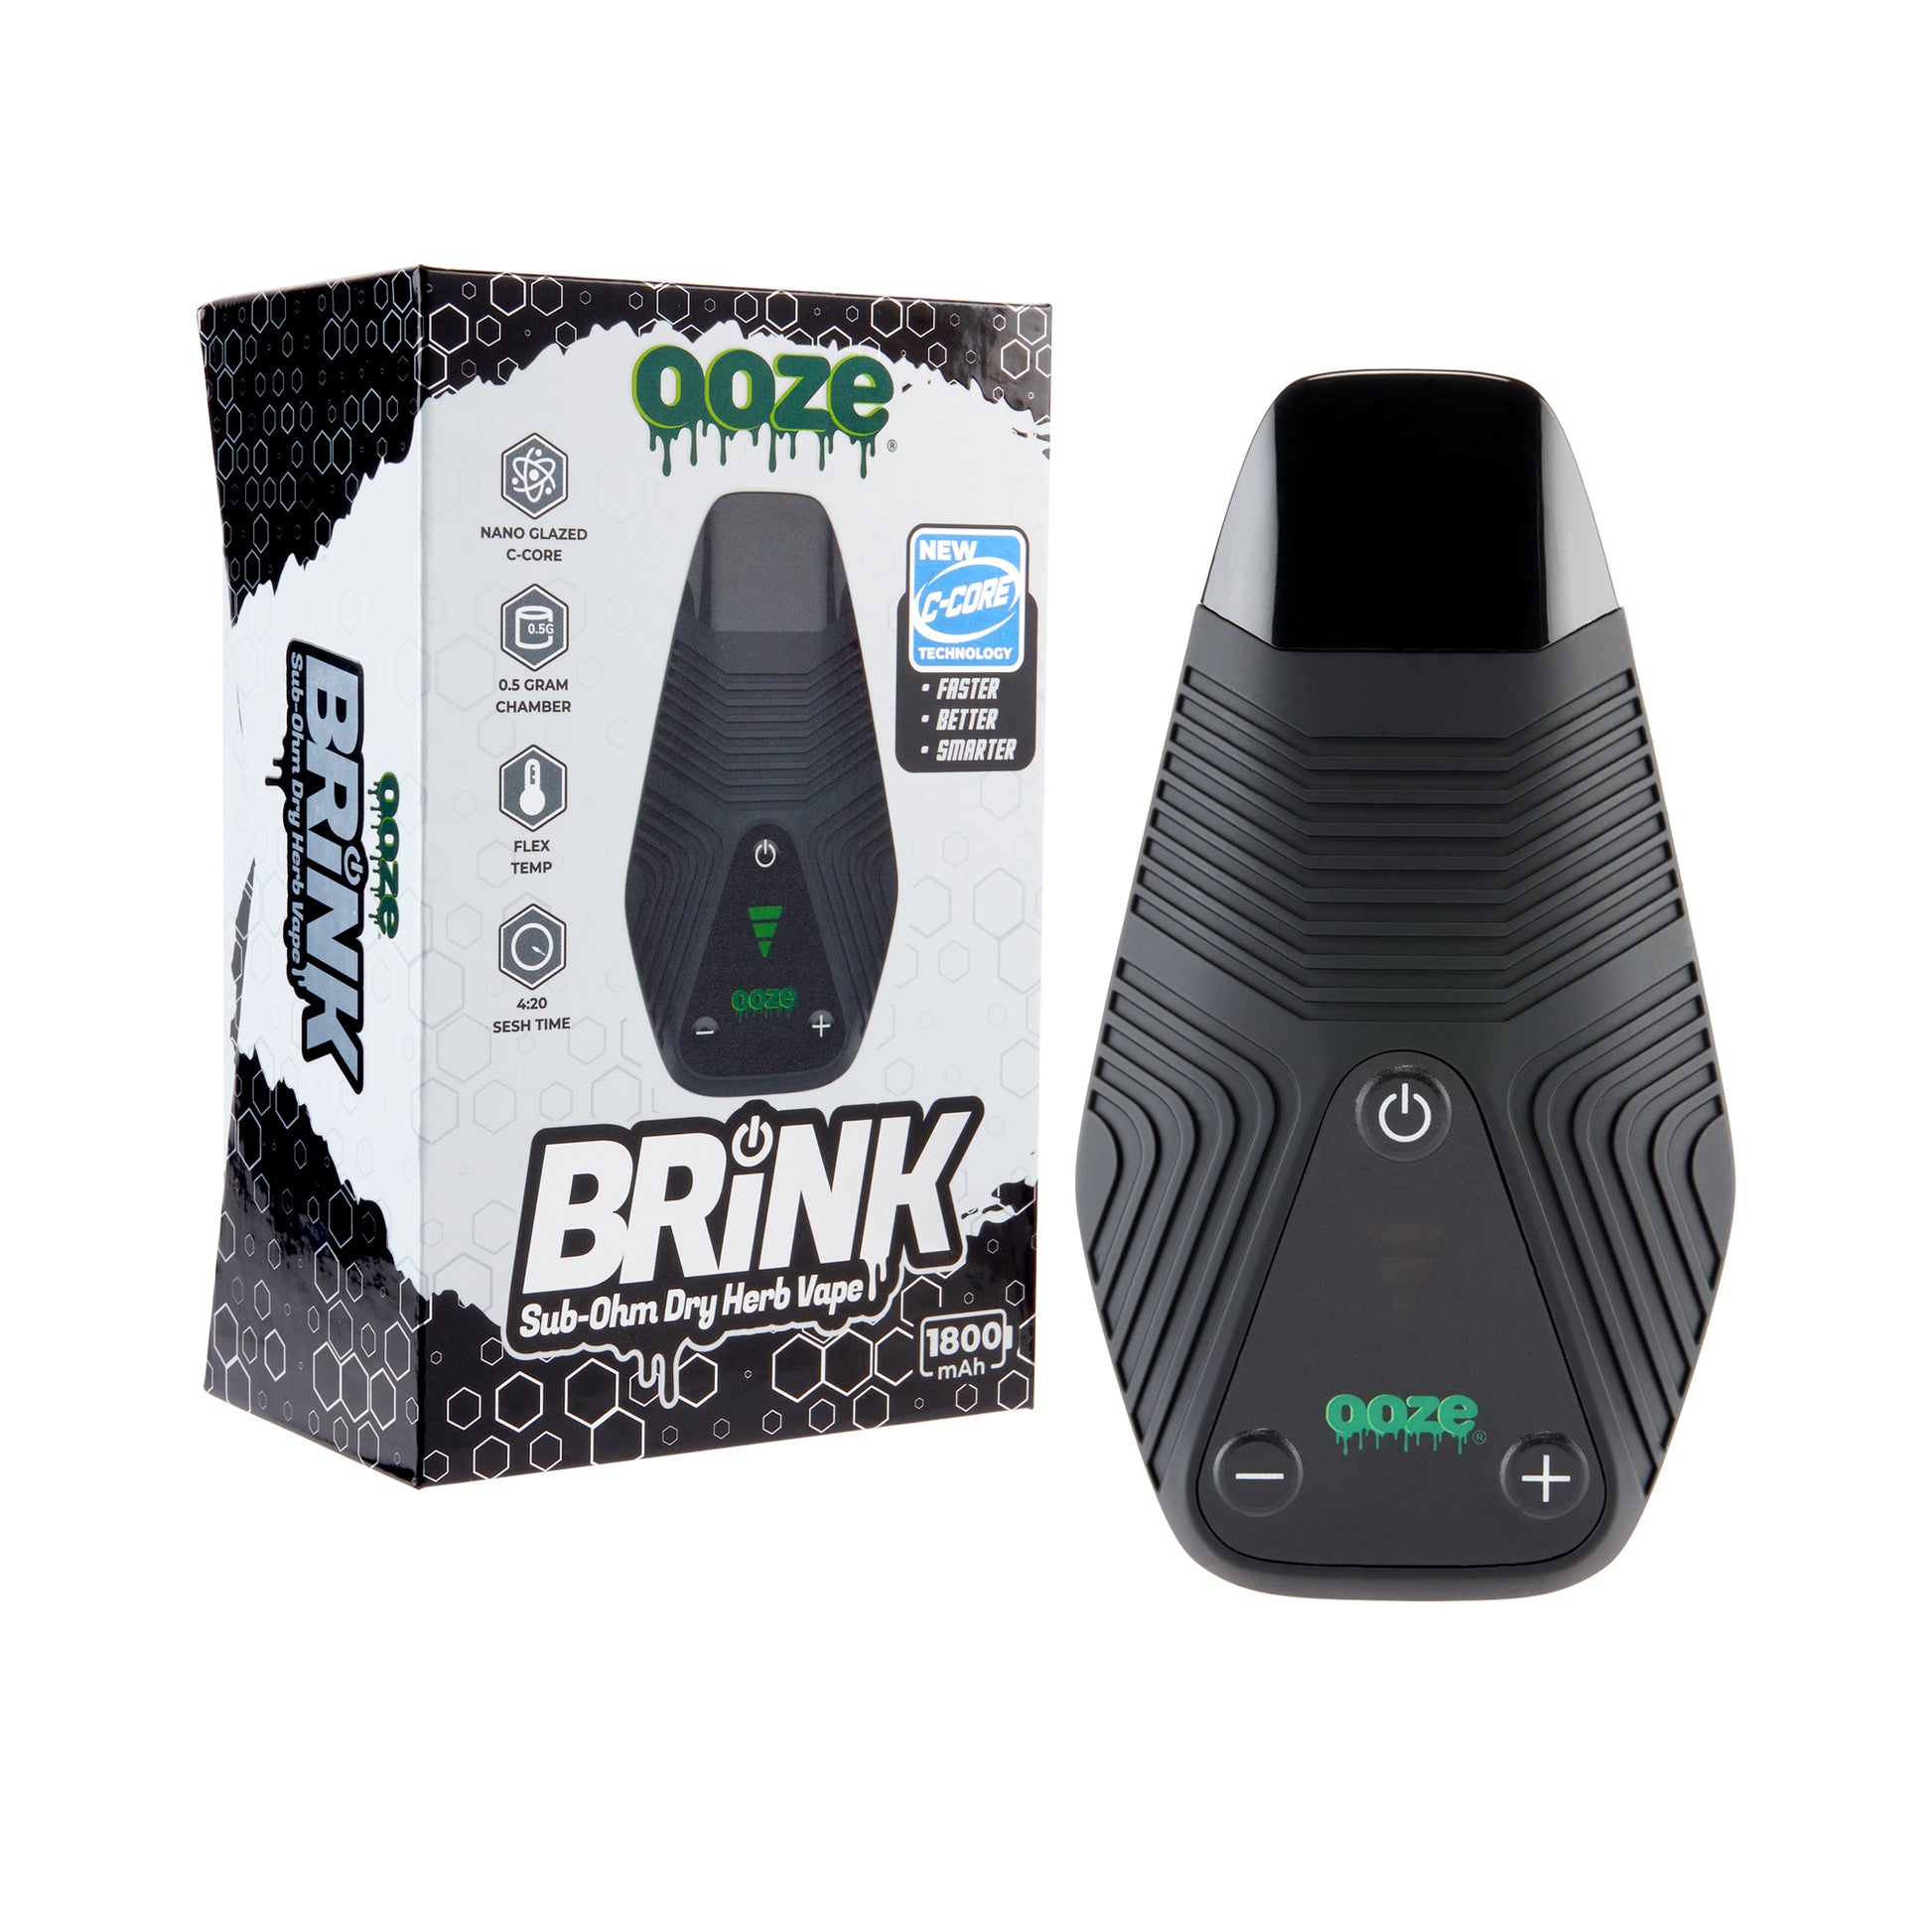 The panther black Ooze Brink dry herb vape is shown next to the box